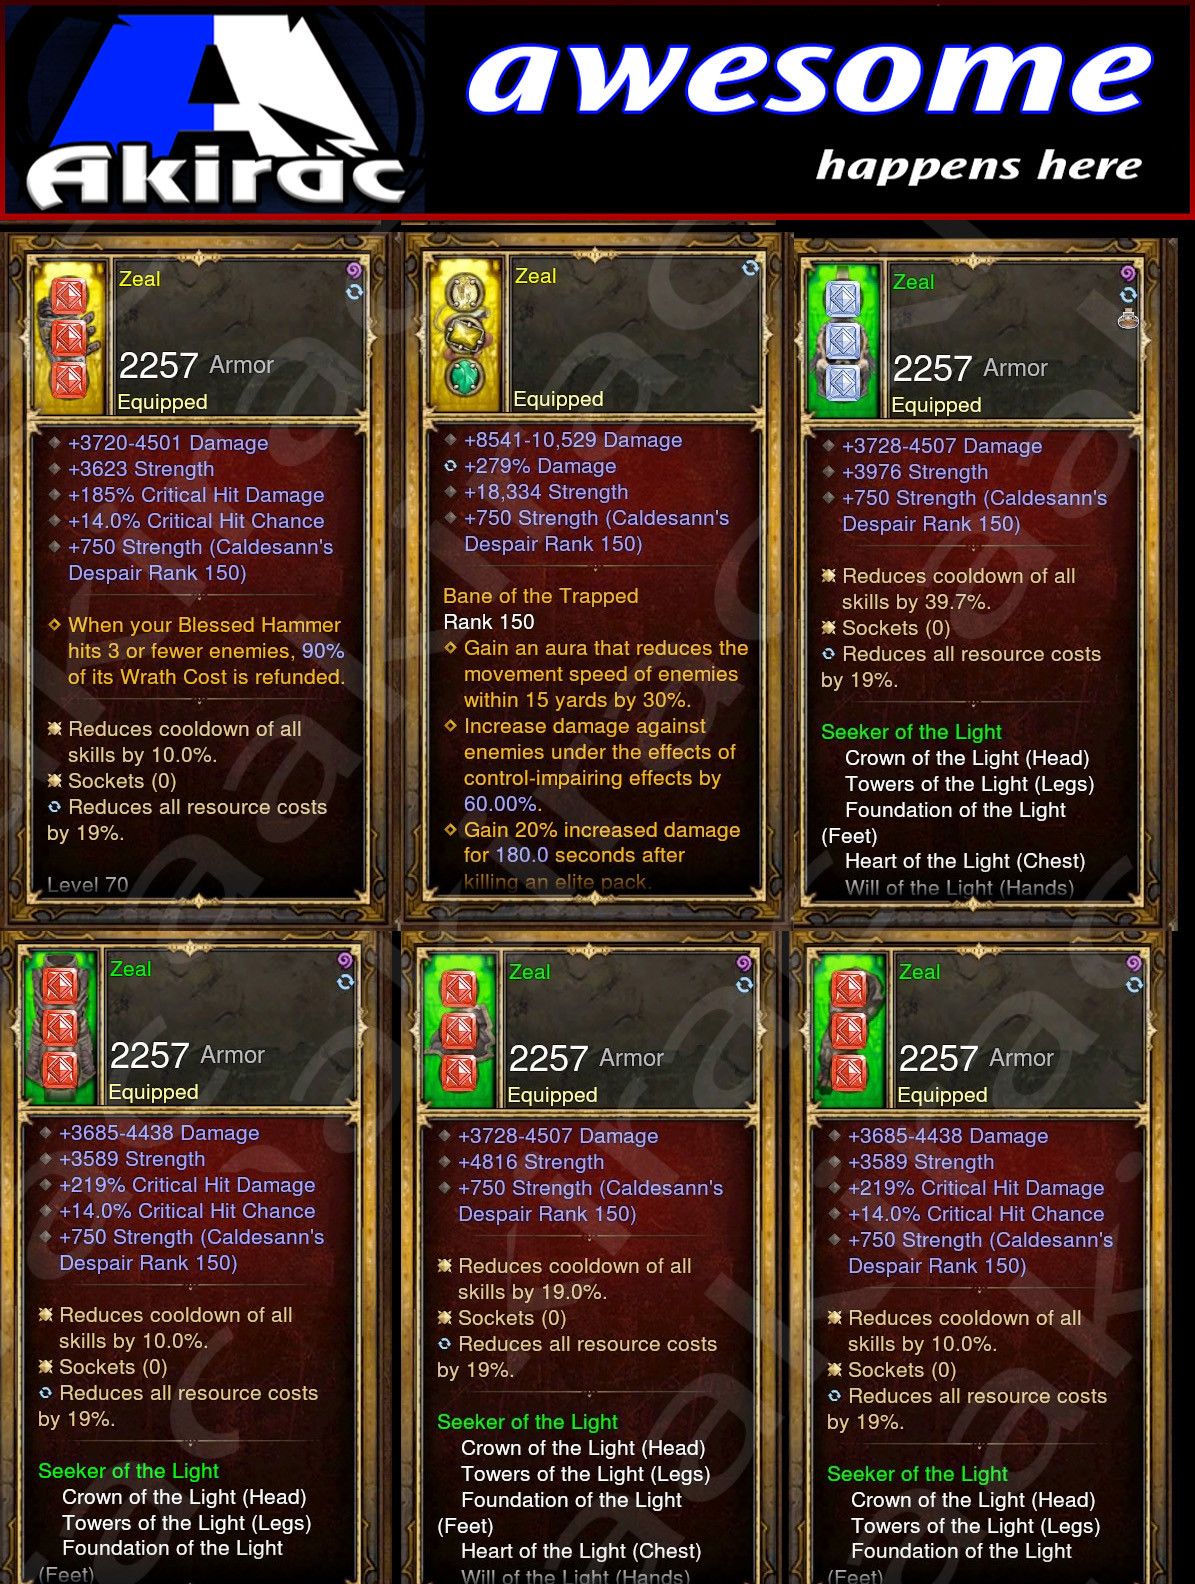 Diablo 3 Immortal v1 Light Crusader Modded Set for Rift 150 Zeal Diablo 3 Mods ROS Seasonal and Non Seasonal Save Mod - Modded Items and Gear - Hacks - Cheats - Trainers for Playstation 4 - Playstation 5 - Nintendo Switch - Xbox One